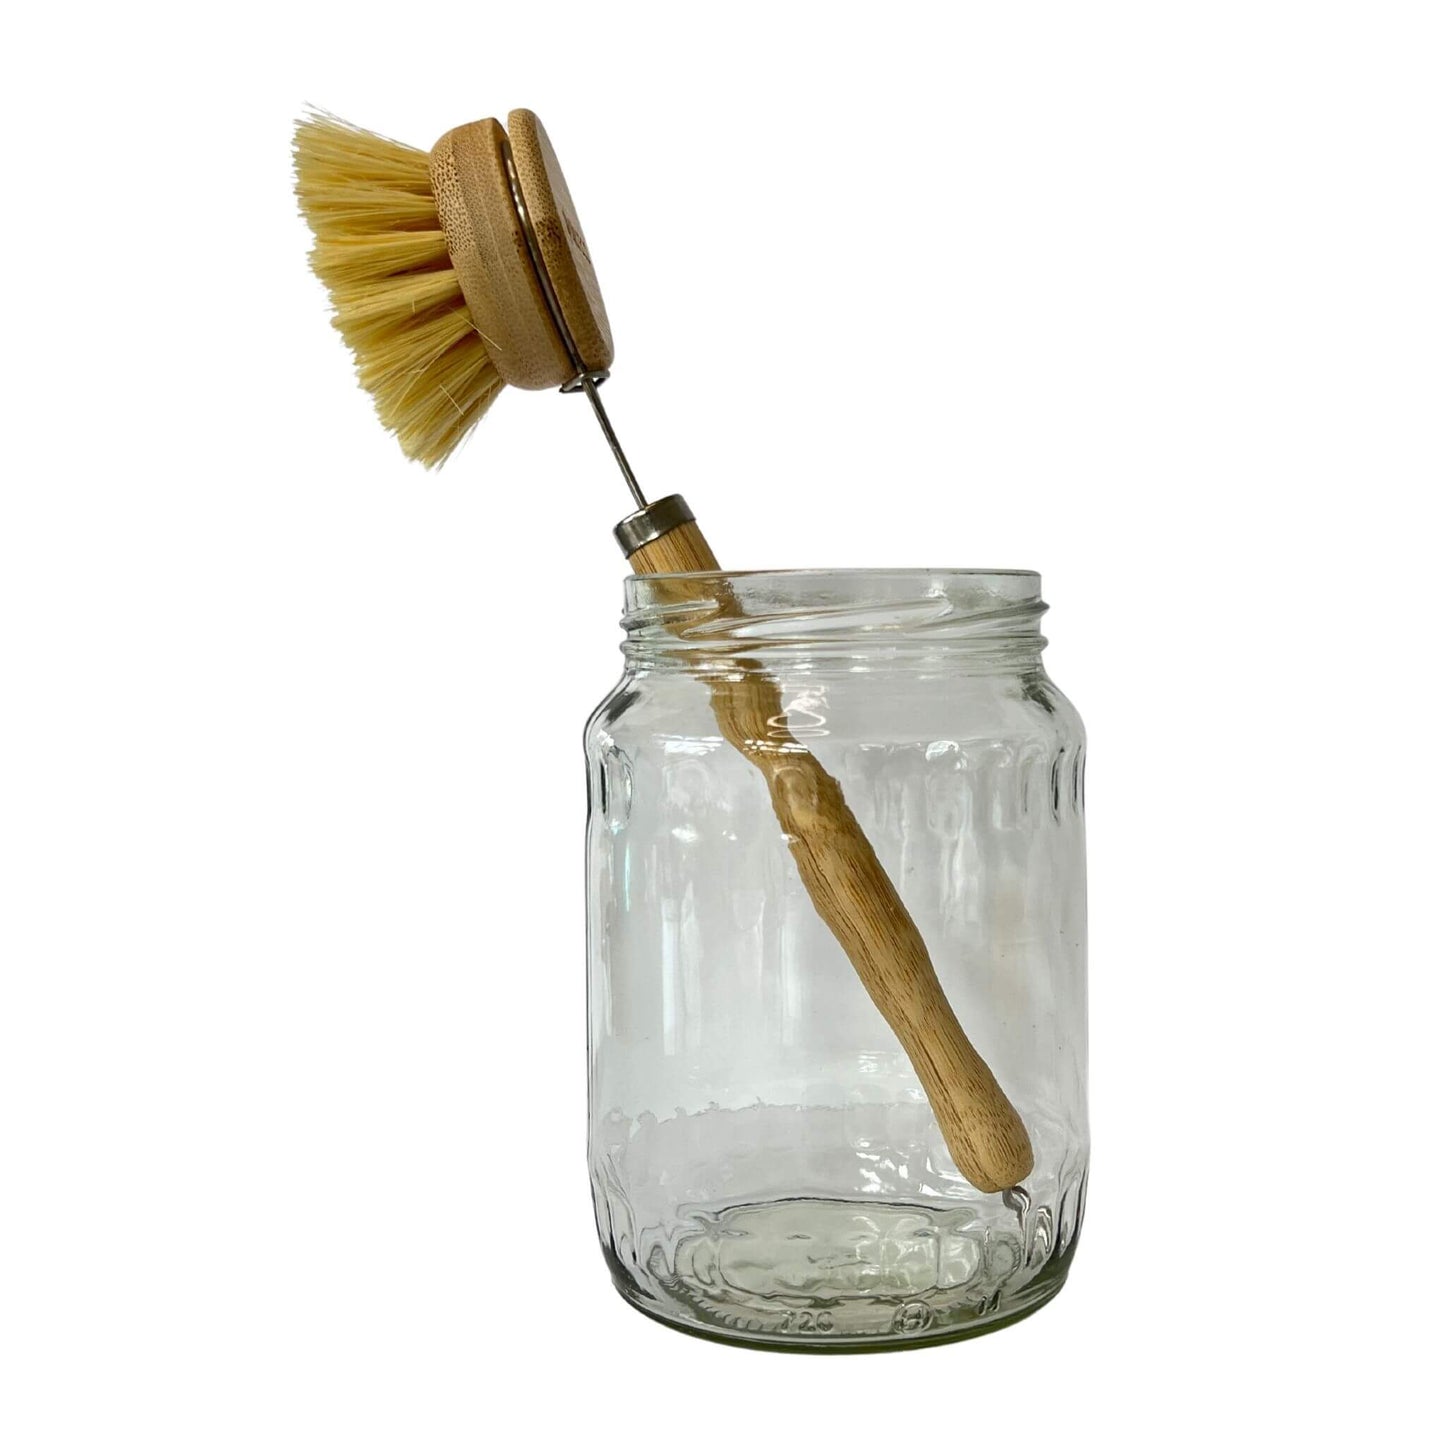 ever eco dish brush in a jar. vegan friendly and zero waste